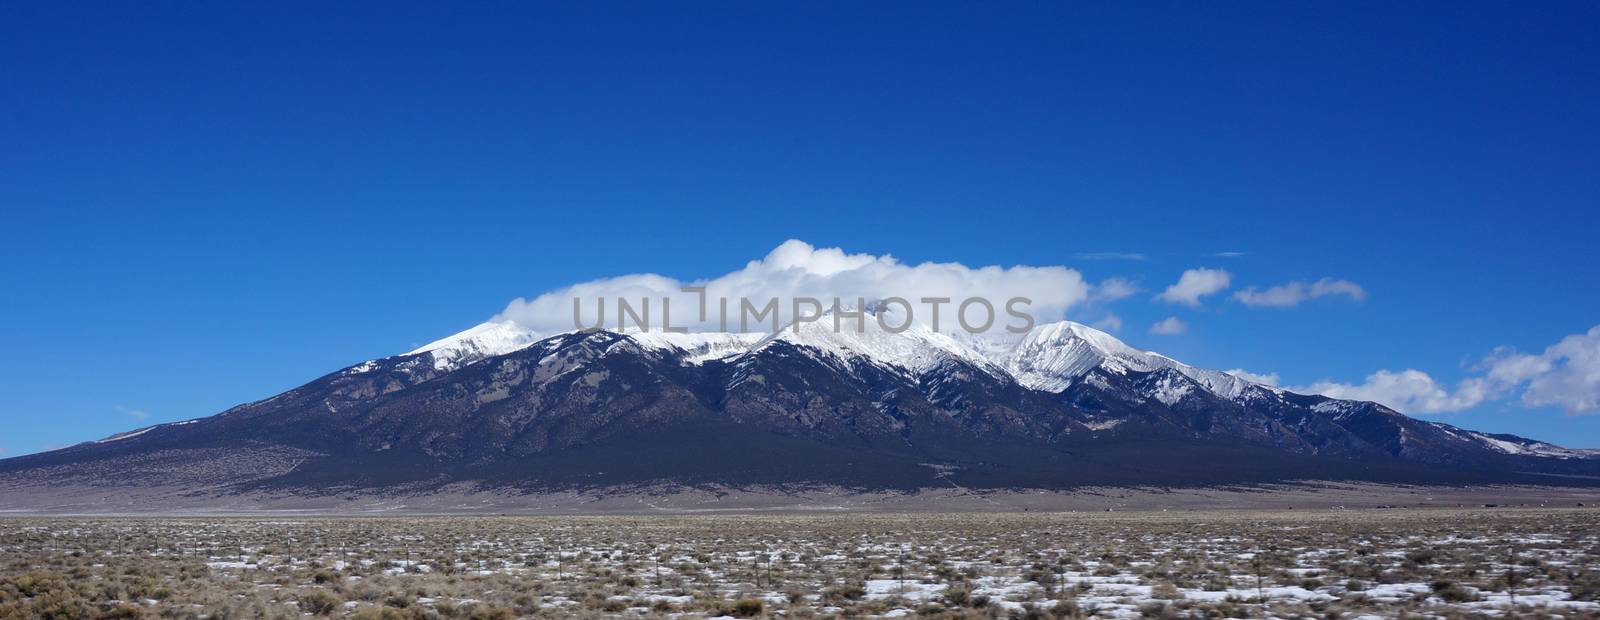 View of mountains in Colorado in winter time. Top of the mountain is being covered by the white snow.